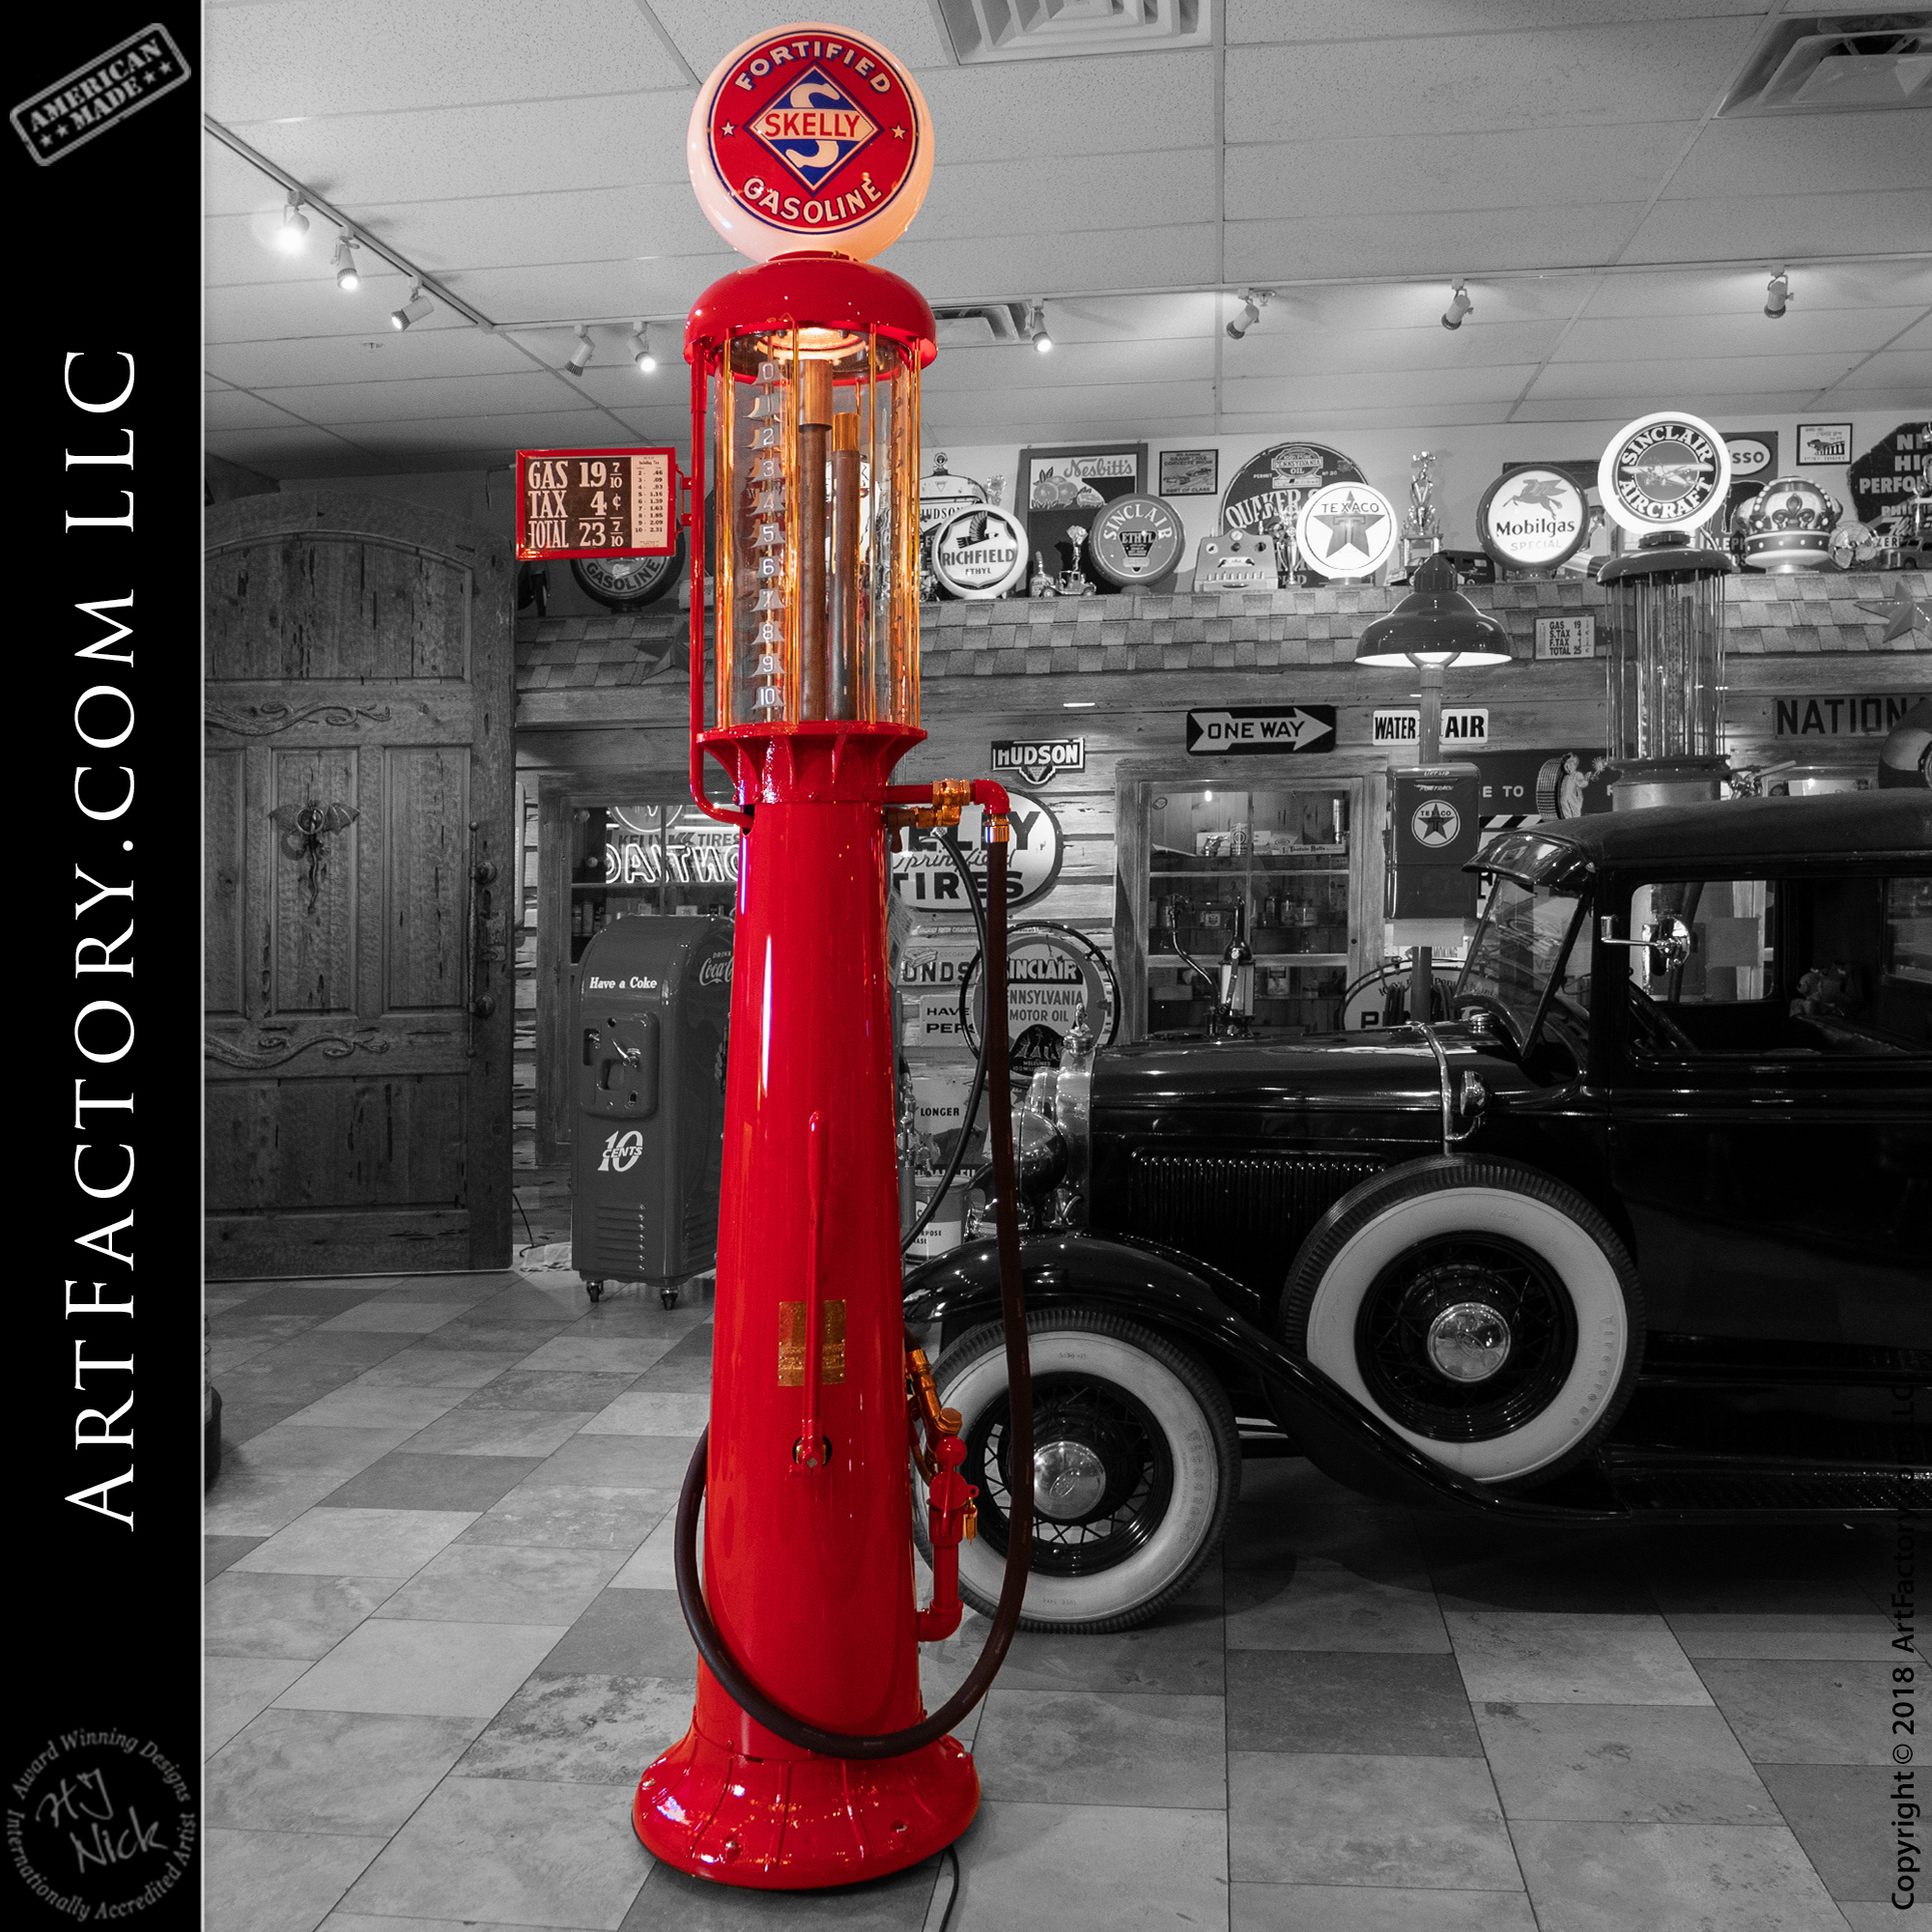 Steve bought a Lubester Oil Cart from us a few months ago. Saw this Texaco air pump that he is interested in: Vintage Restored Texaco Air Pole: With Water Hose & Island Light – AP4214 https://mancave.artfactory.com/product/vintage-restored-texaco-air-pole/